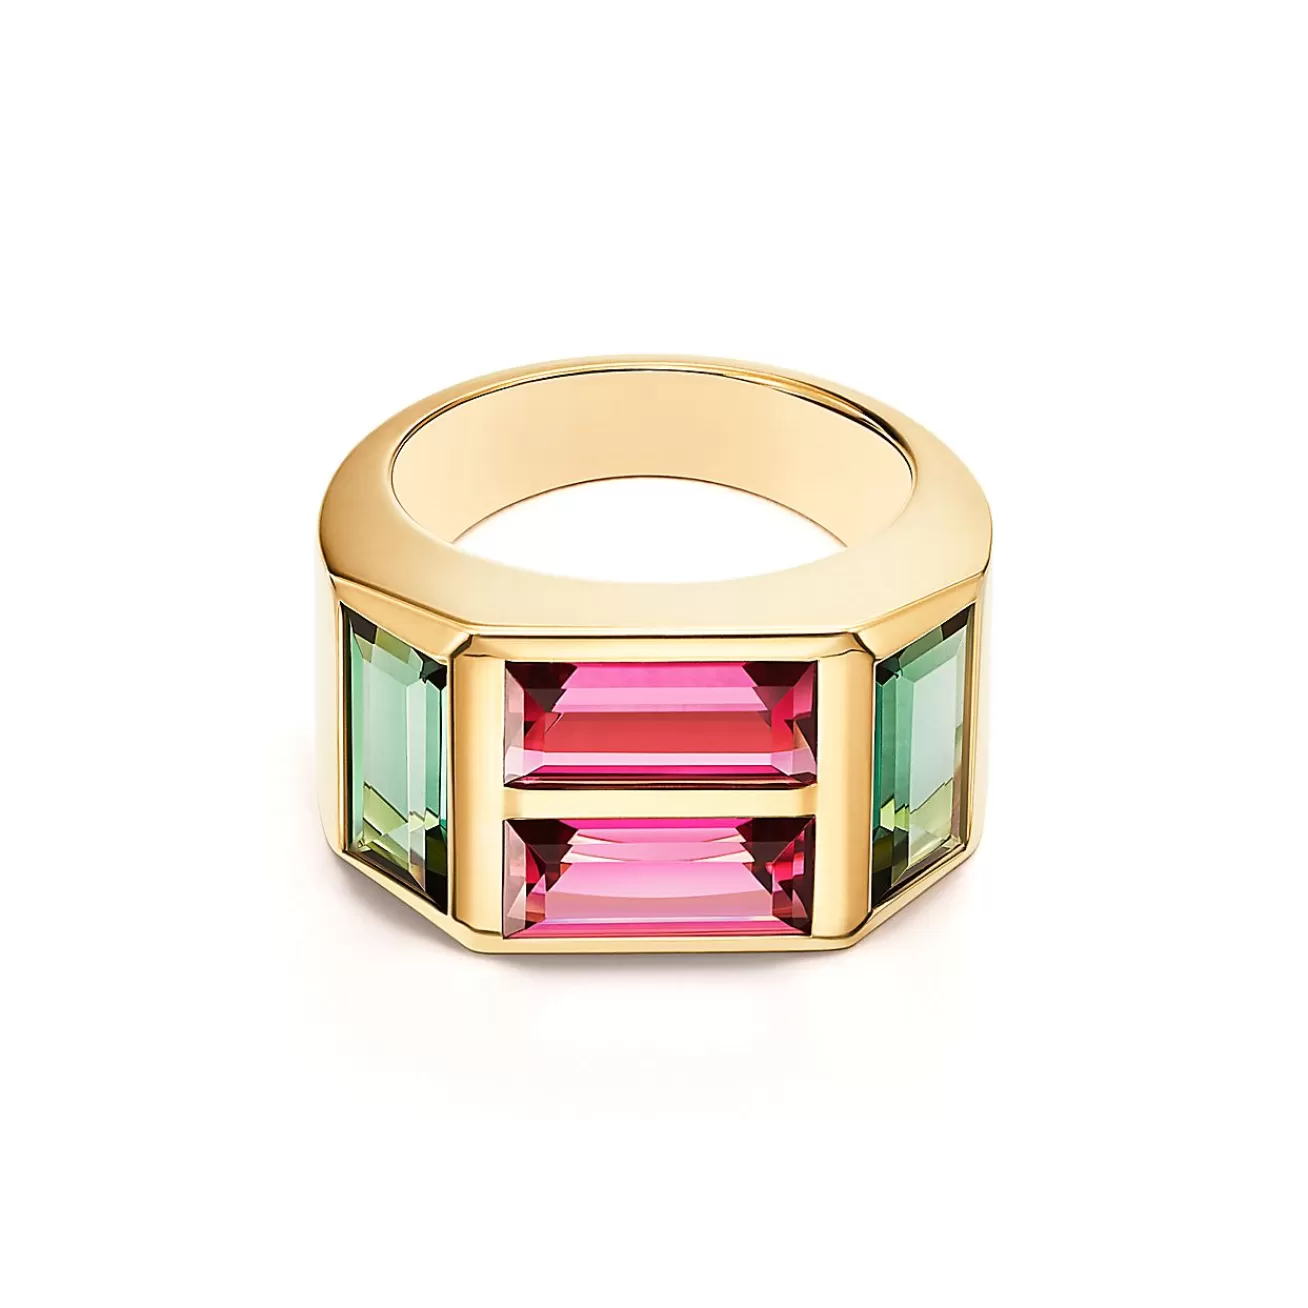 Tiffany & Co. Paloma's Studio baguette four-stone ring in 18k gold with gemstones. | ^ Rings | Gold Jewelry